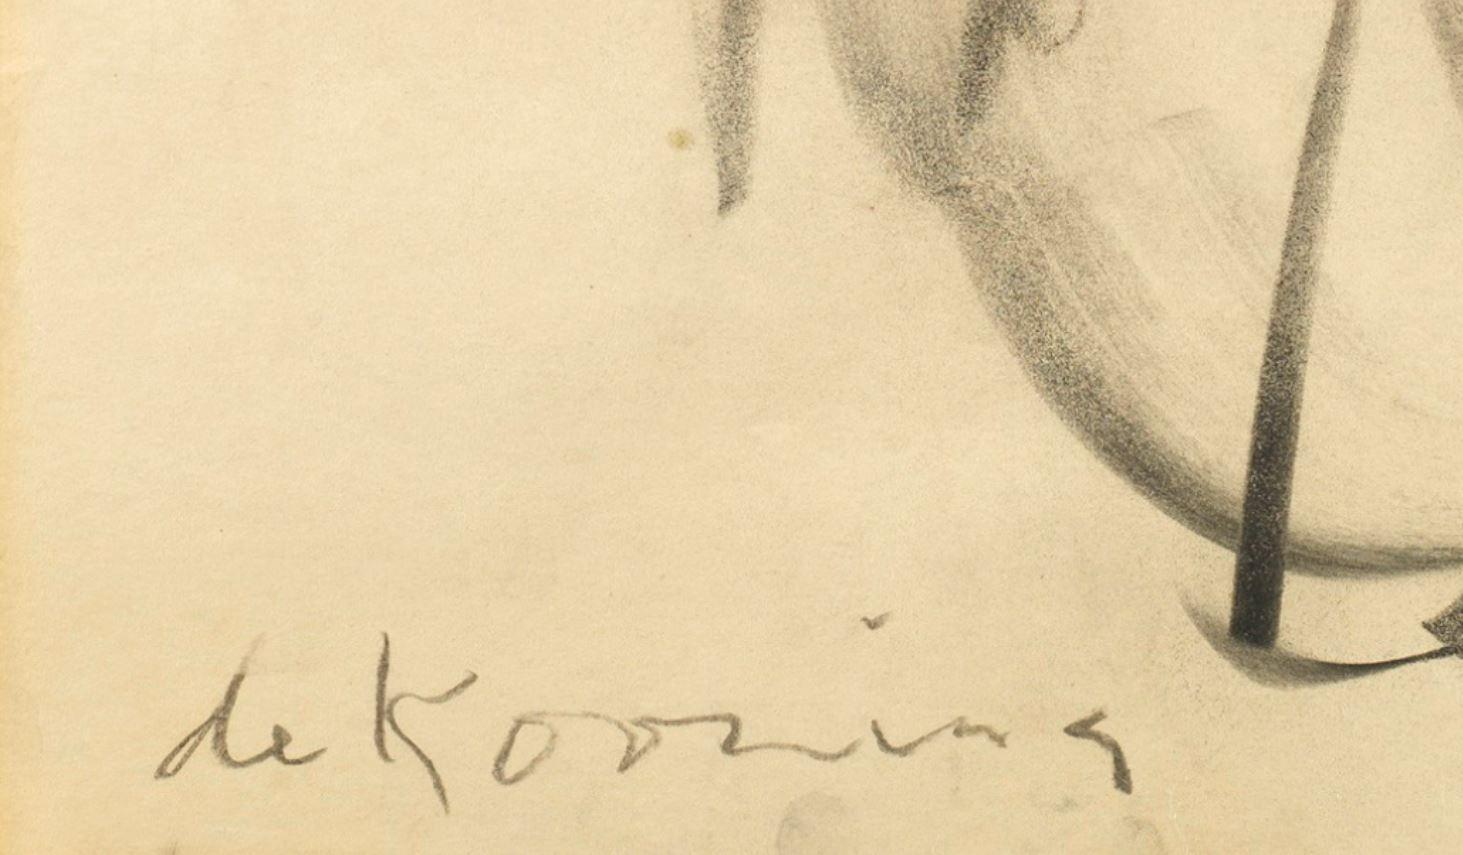 Willem de Kooning (American/Dutch, 1904–1997)
Untitled, 1965
Charcoal on paper
Signed and inscribed lower left: “de Kooning'
60.2 by 47.2 cm.

Provenance
- Private Collection, Italy
- Private Collection, Europe

About: Willem de Kooning